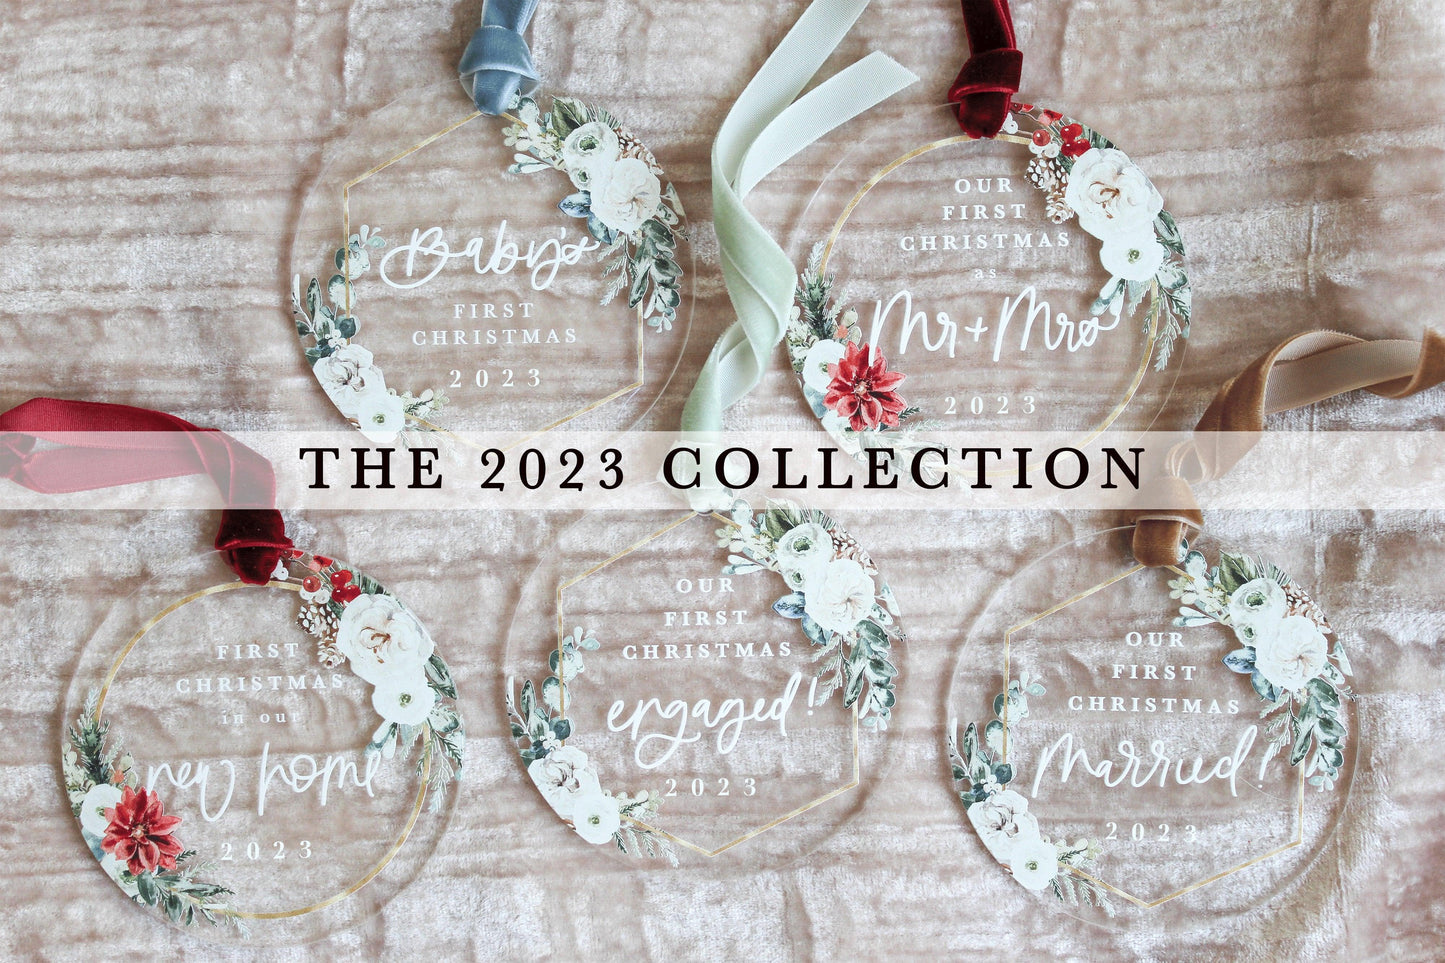 First Christmas as Mr. and Mrs. 2023 Ornament - Plum Grove Design